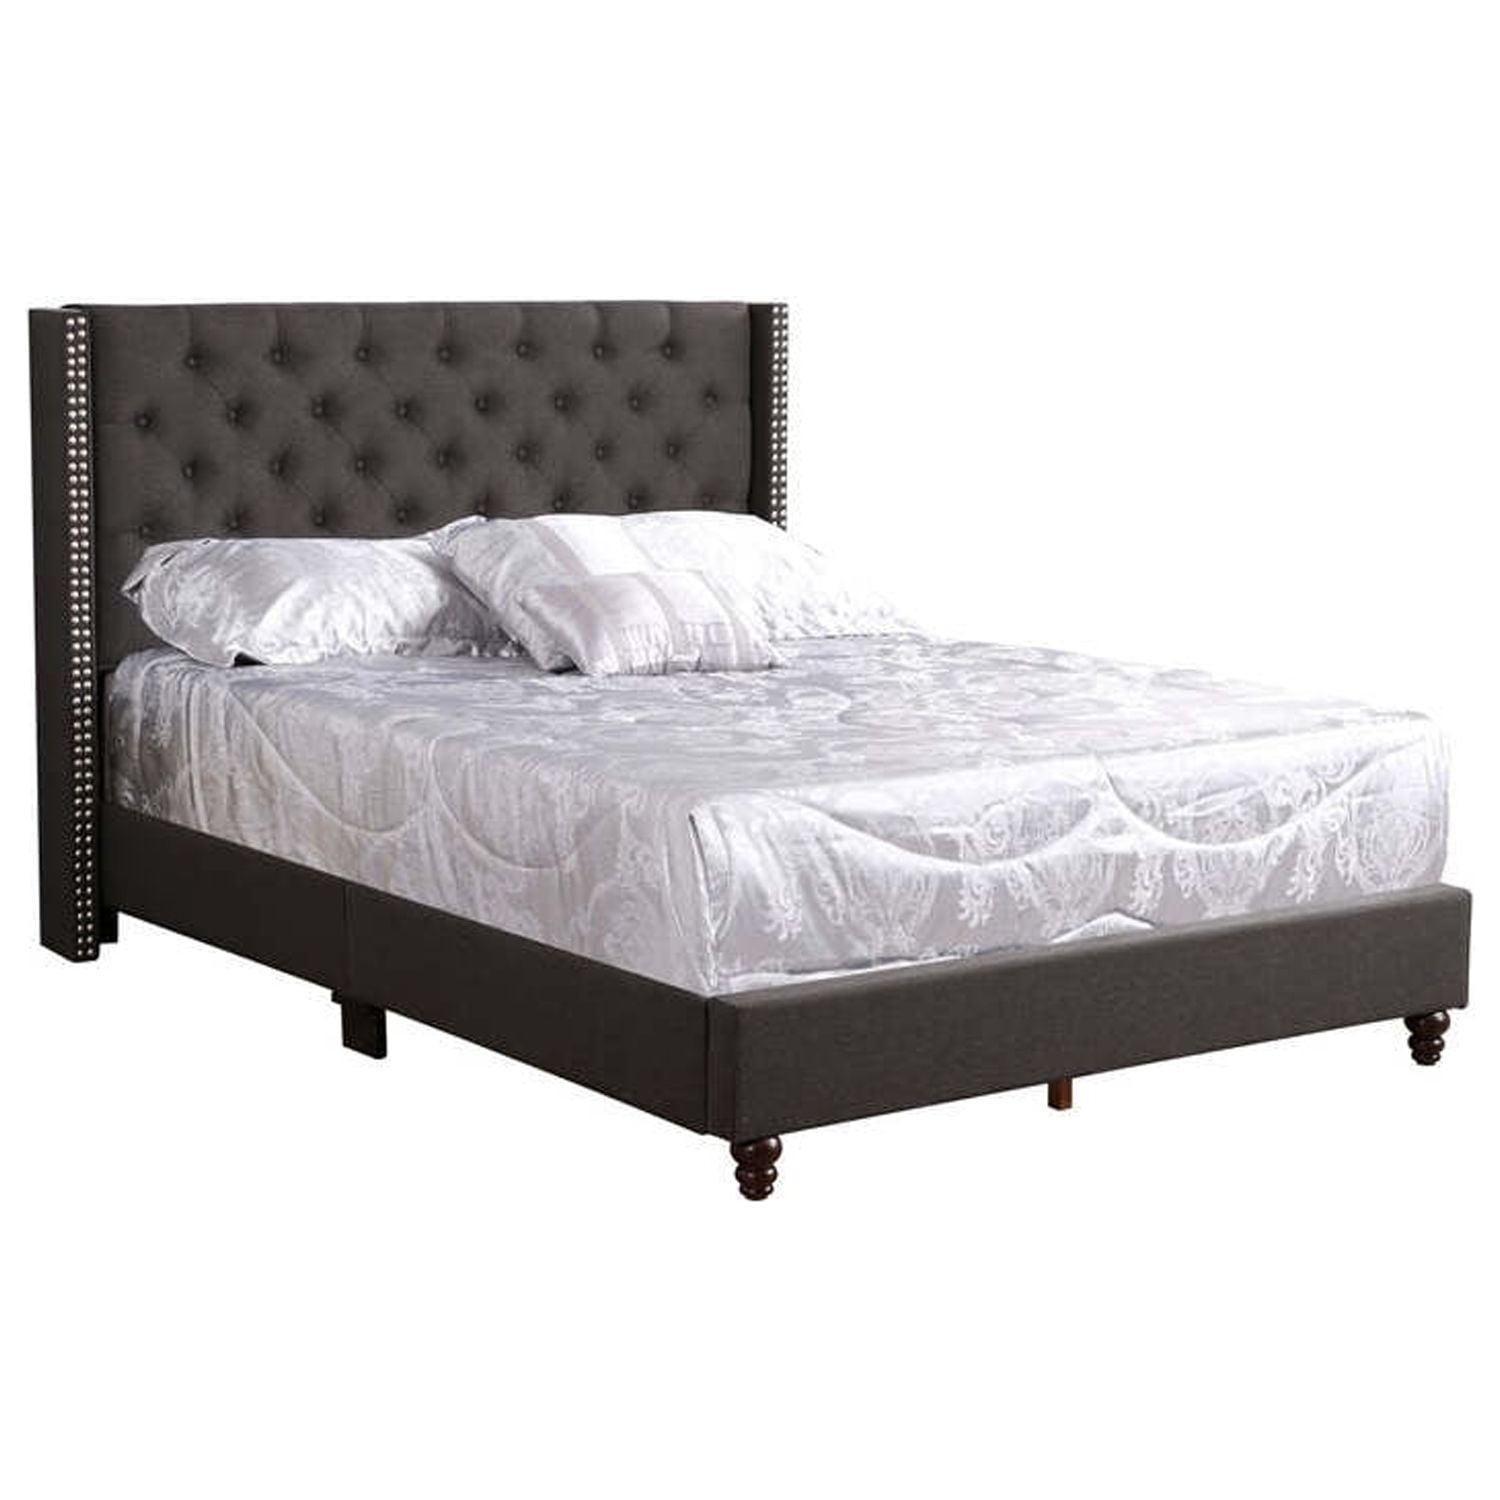 Regal King 50''x82''x86'' Black Faux Leather Upholstered Bed with Nailhead Trim